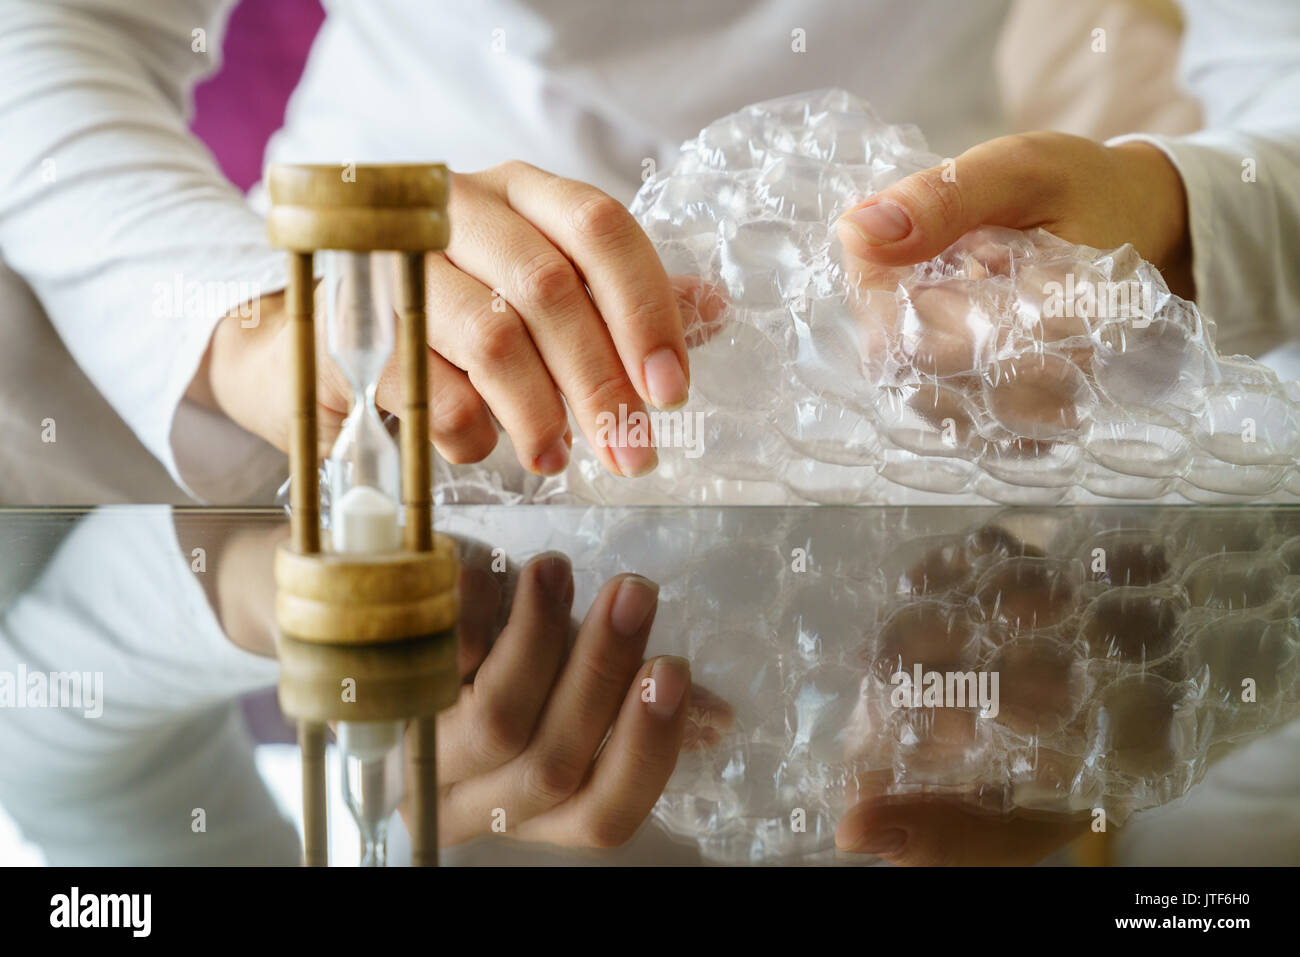 Close-up image of woman's hands popping bubble wrap Banque D'Images